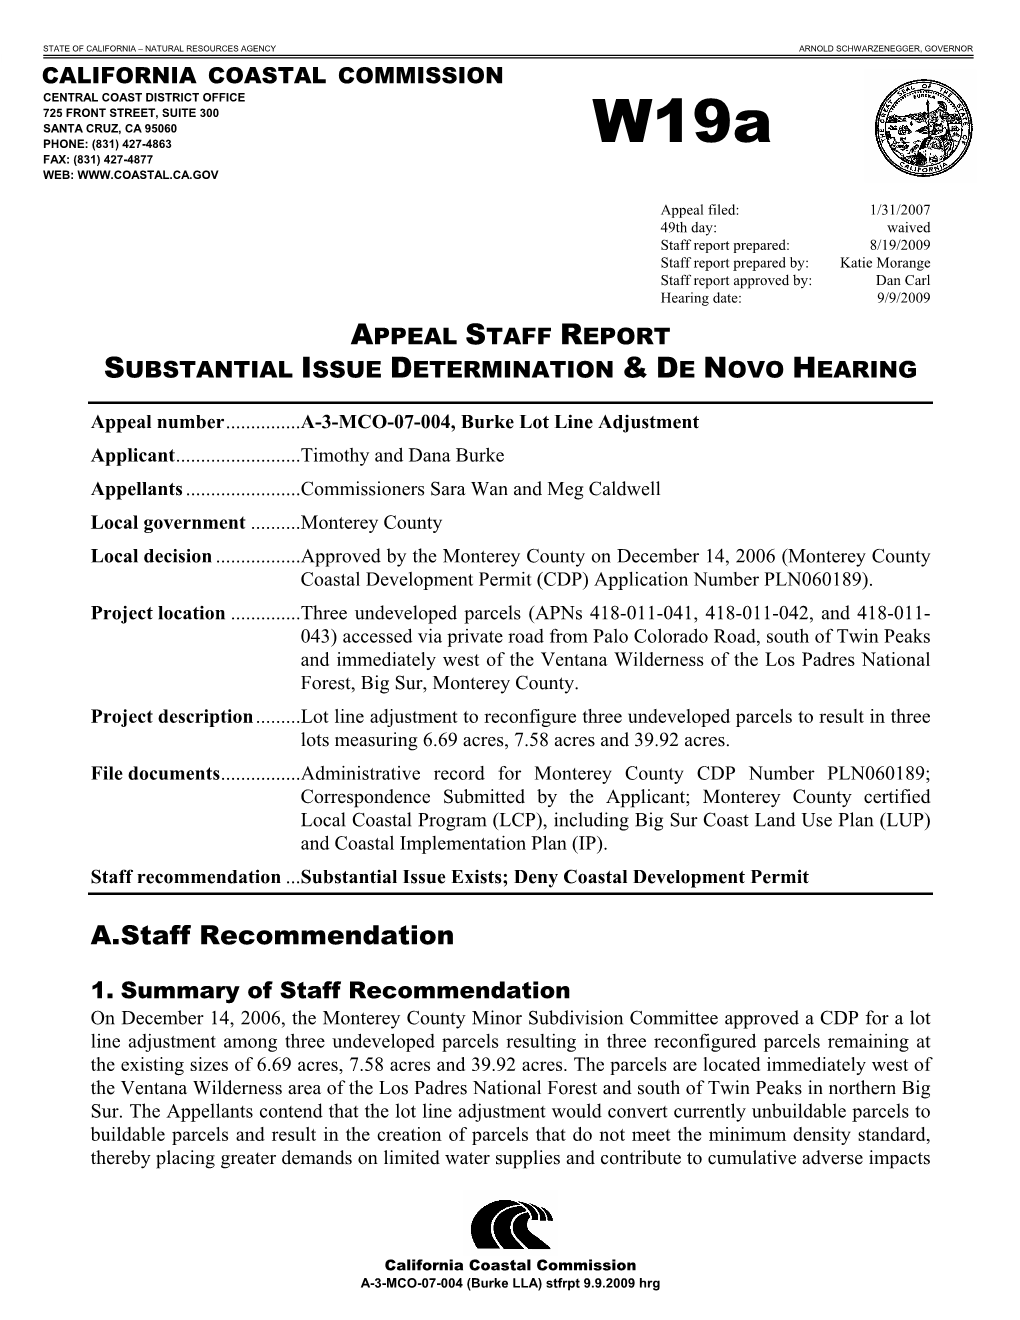 California Coastal Commission Staff Report and Recommendation